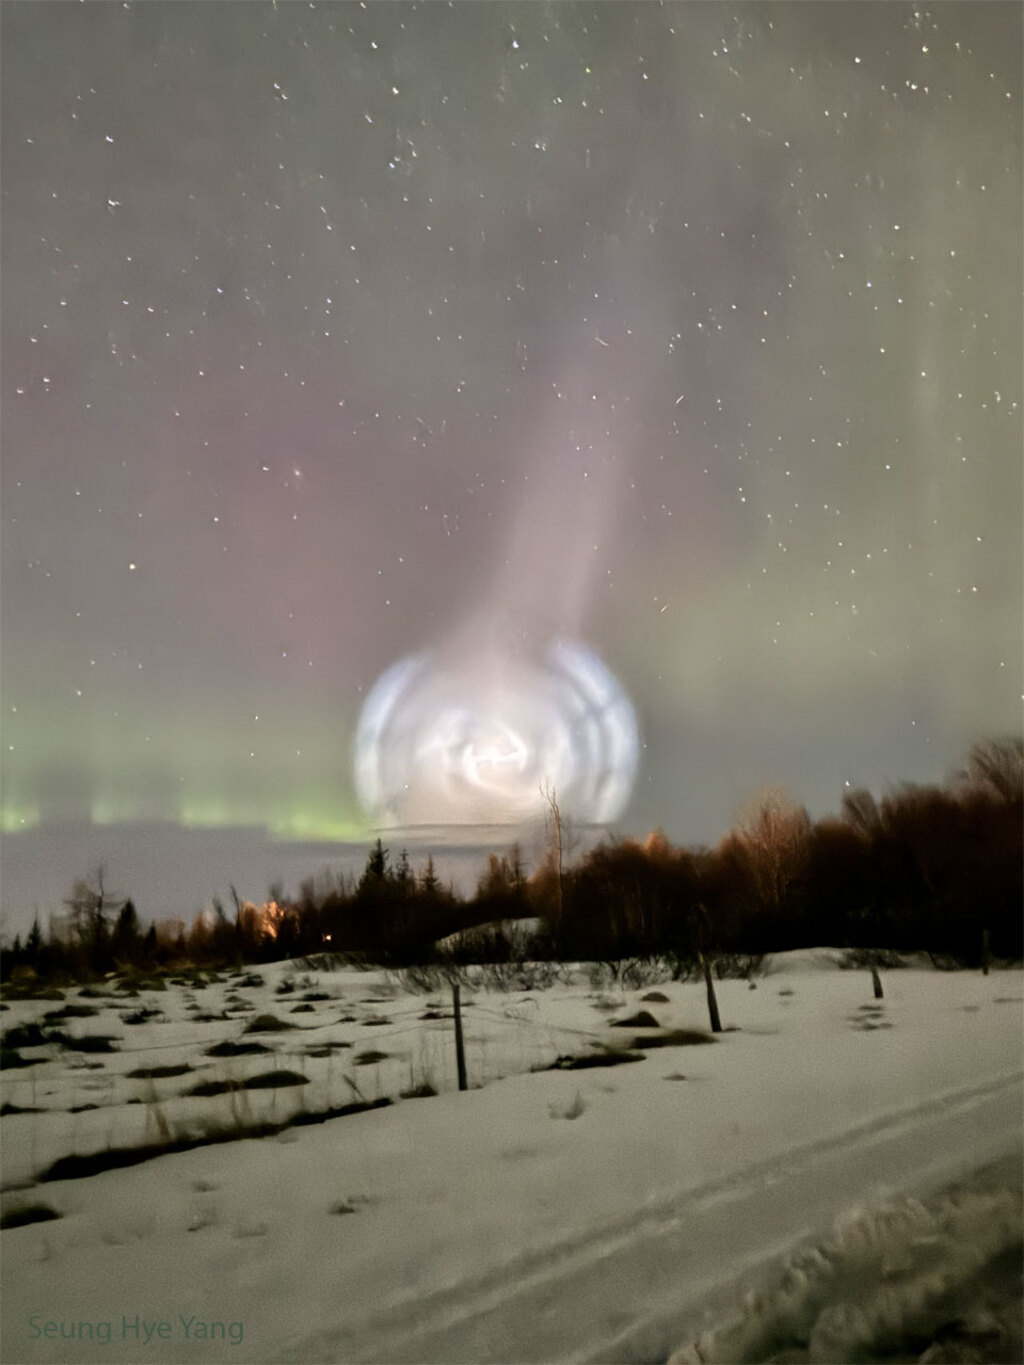 Bright white swirled light at the foreground of an active aurora